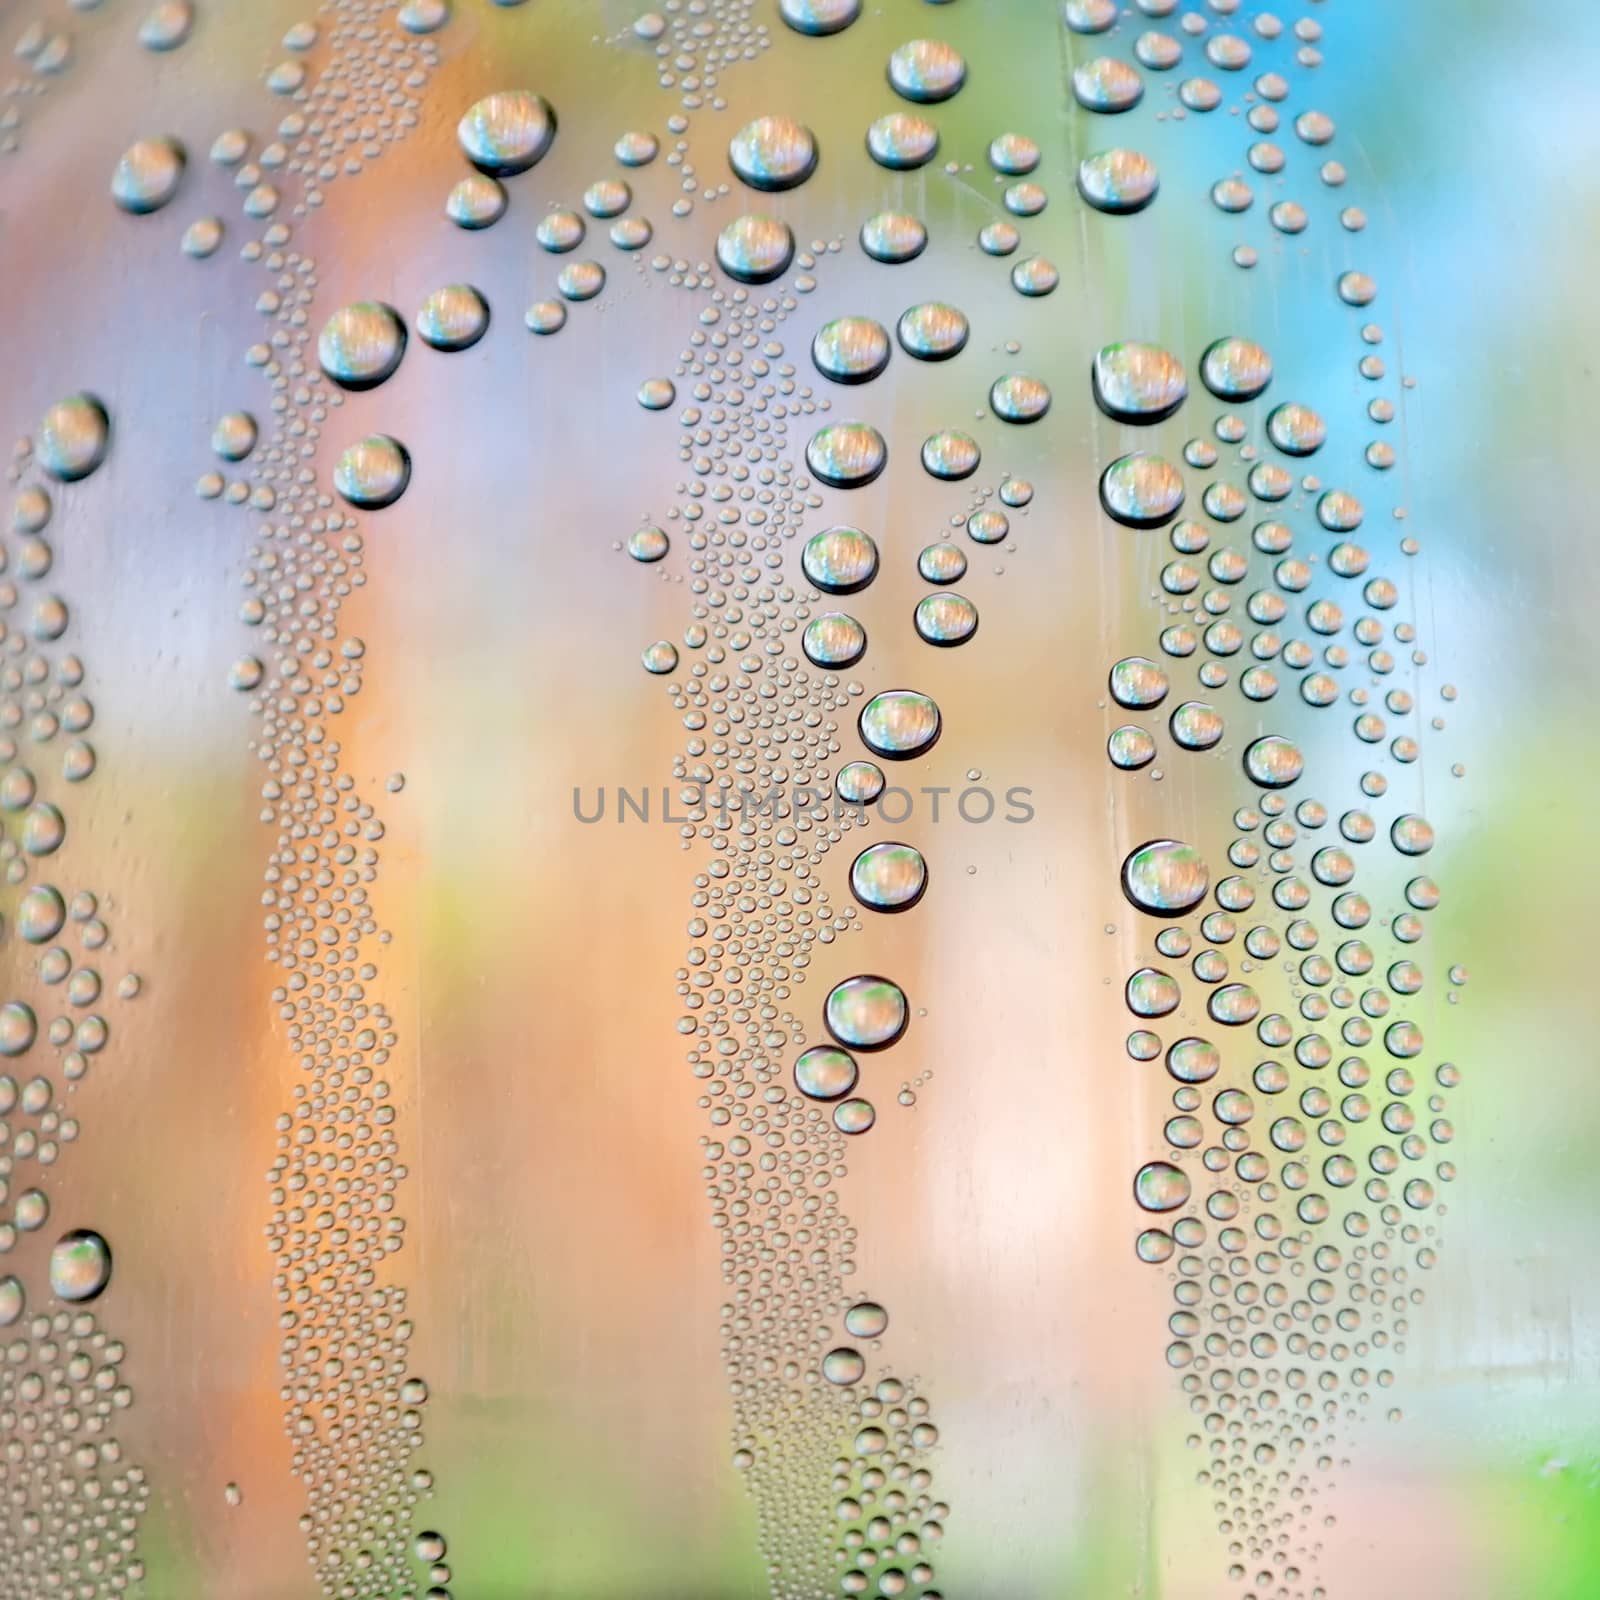 Drops of water on the glass by sergpet